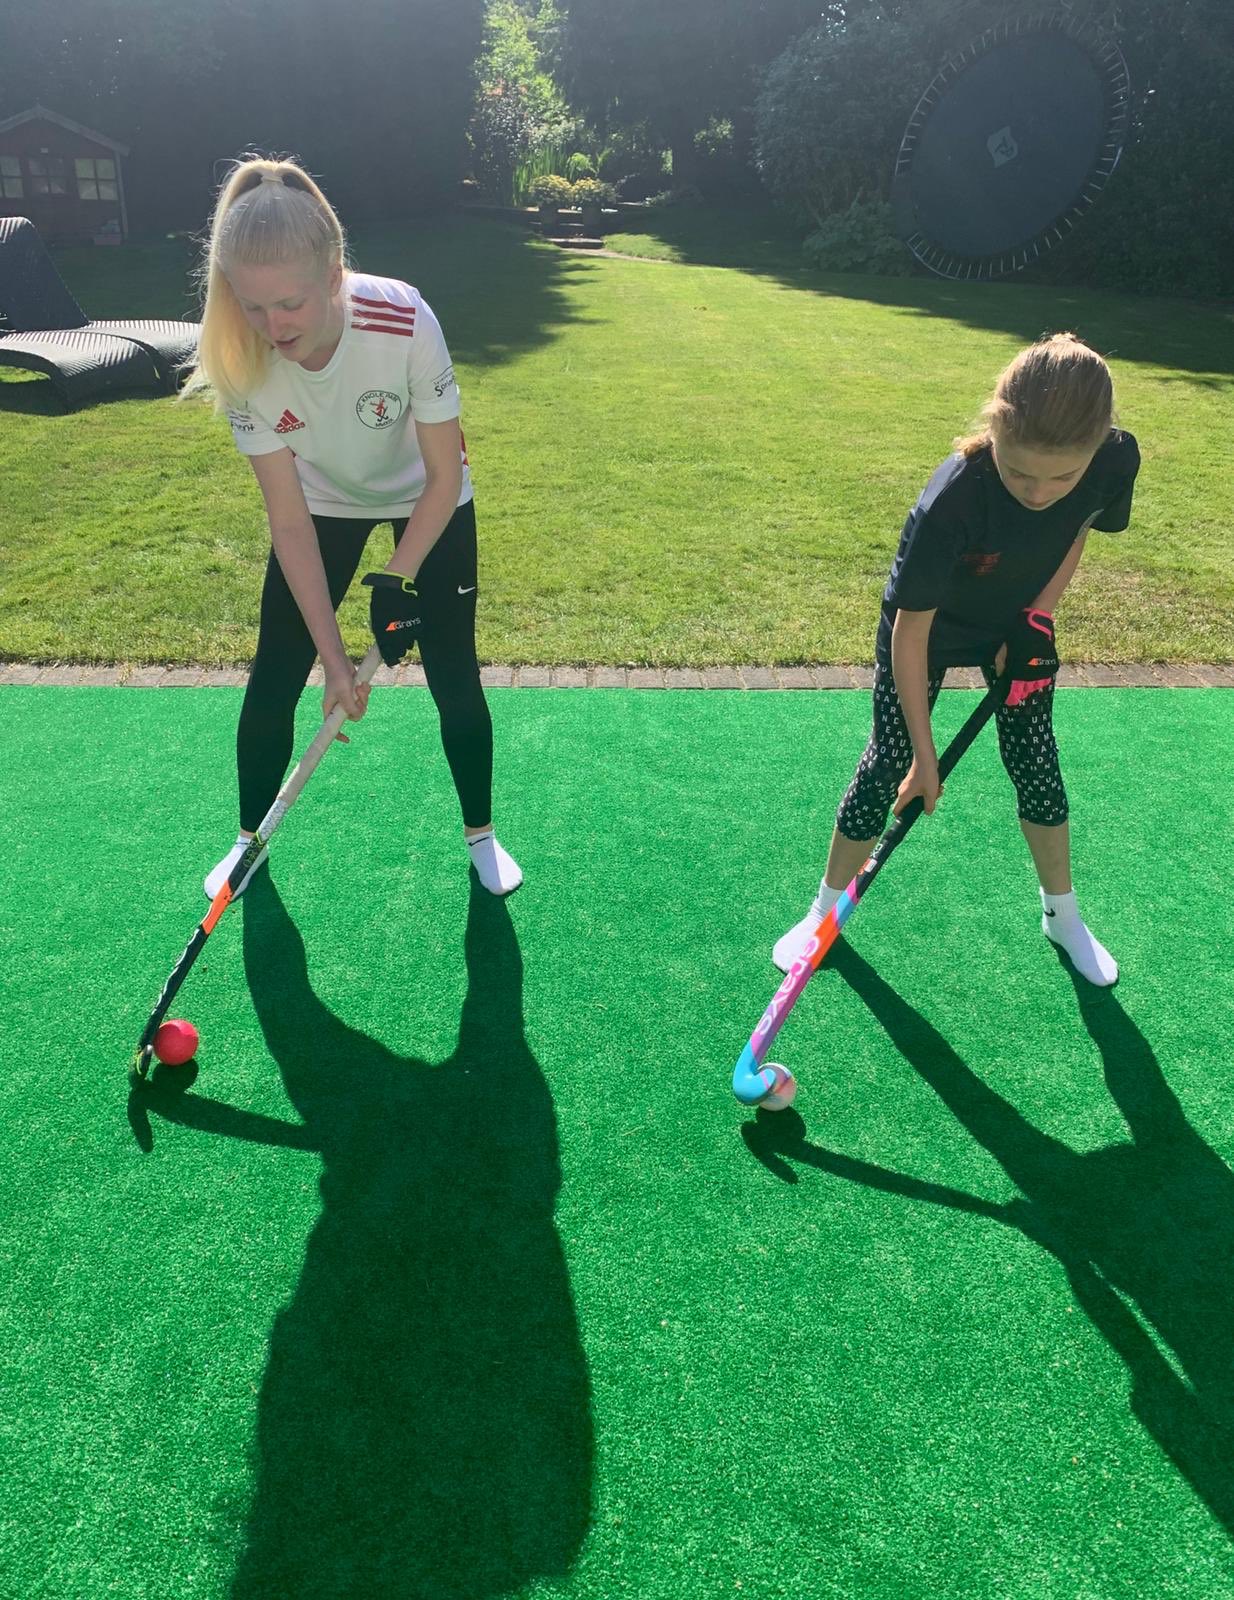 Two girls standing on grass in a garden using hockey sticks to move a hockey ball.